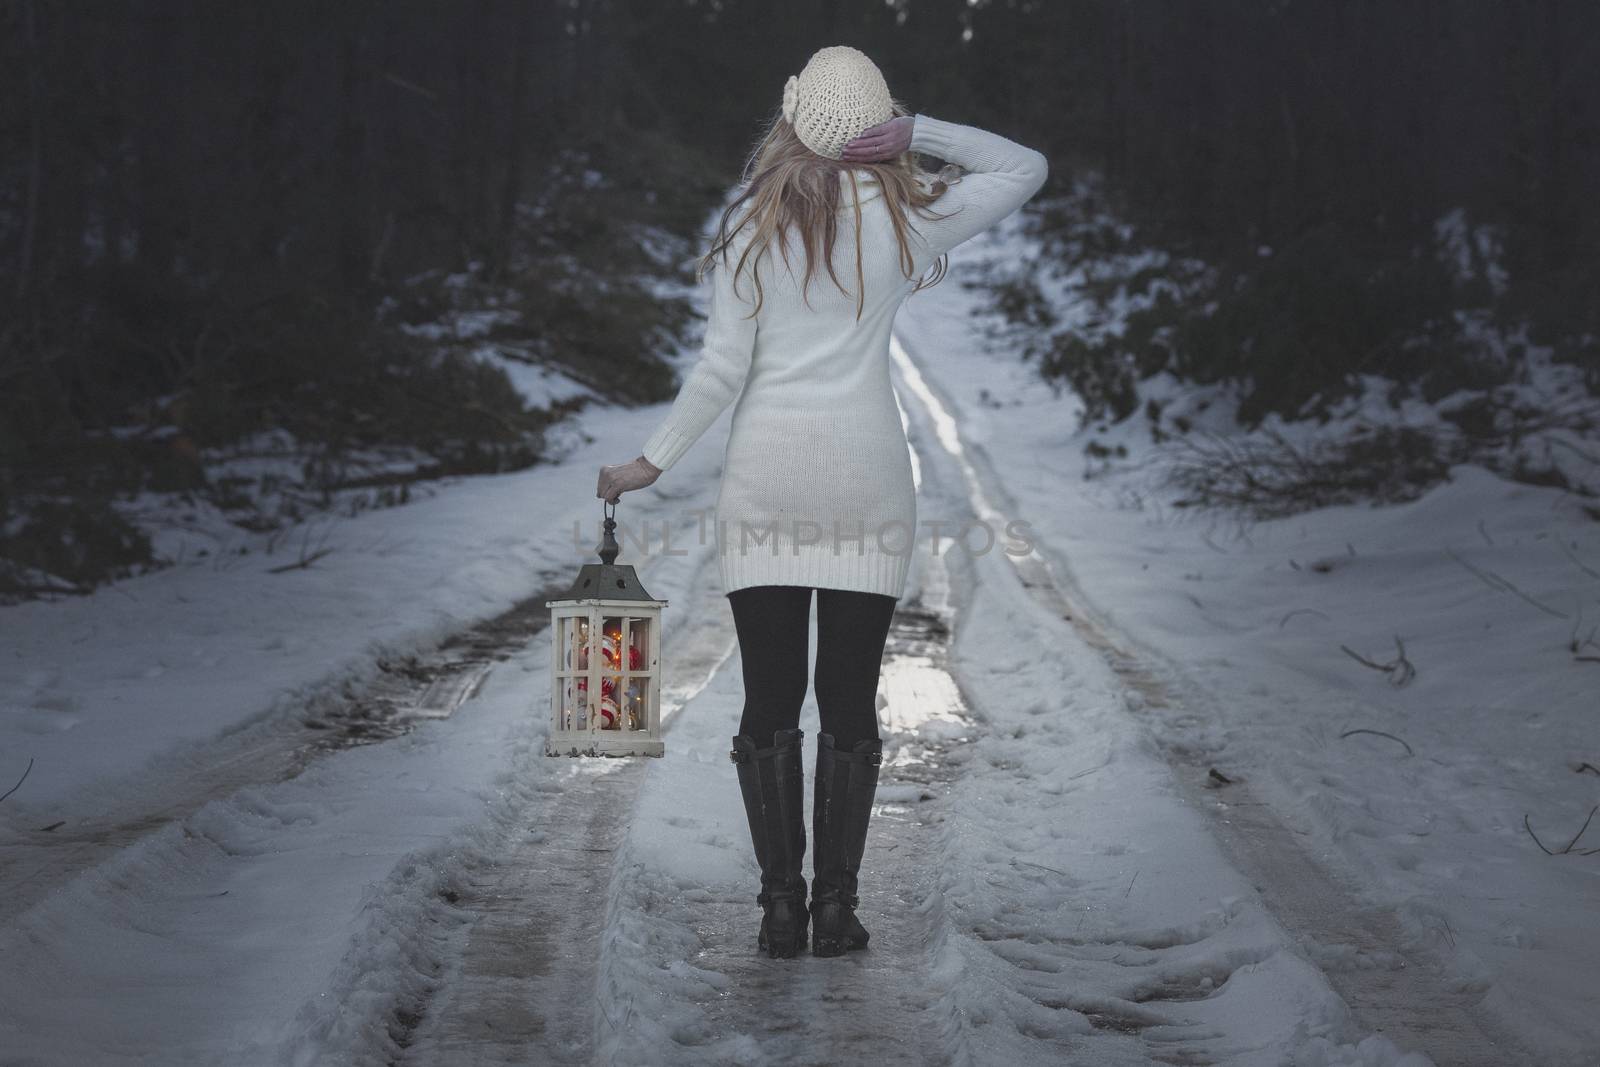 Woman walking along an icy road through forest in winter with lantern